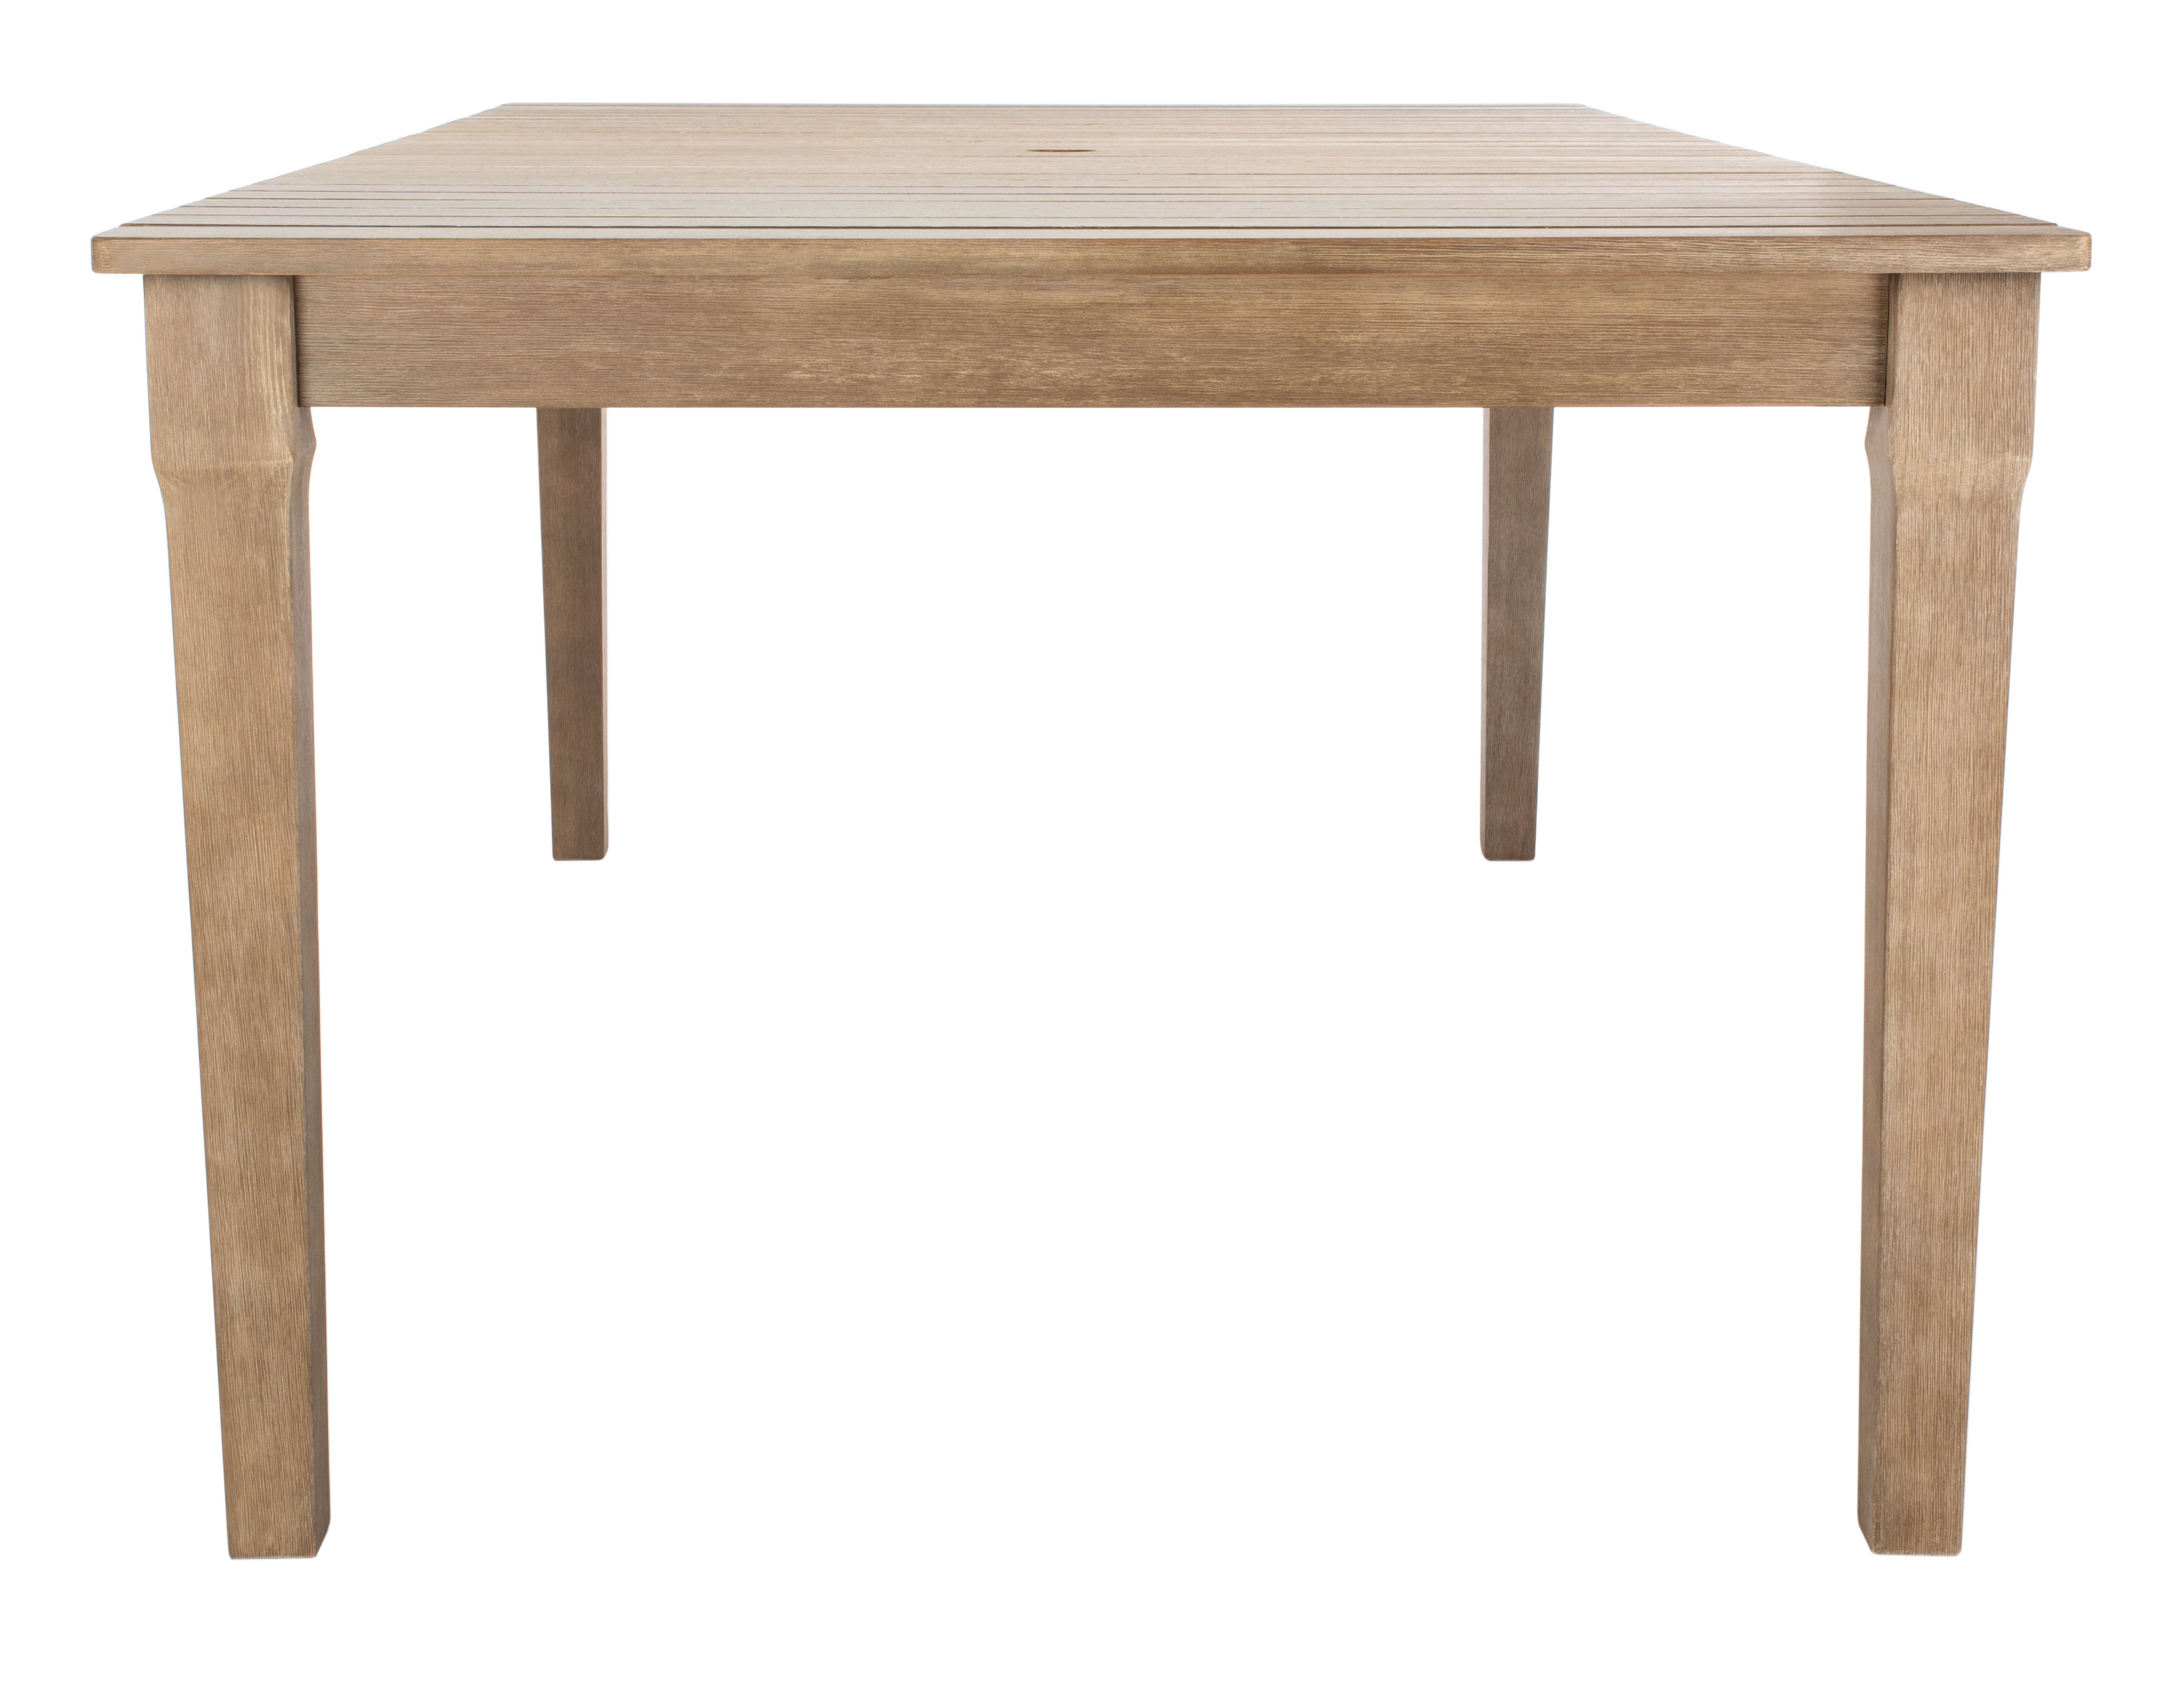 Dominica Wooden Outdoor Dining Table - Natural - Arlo Home - Image 3